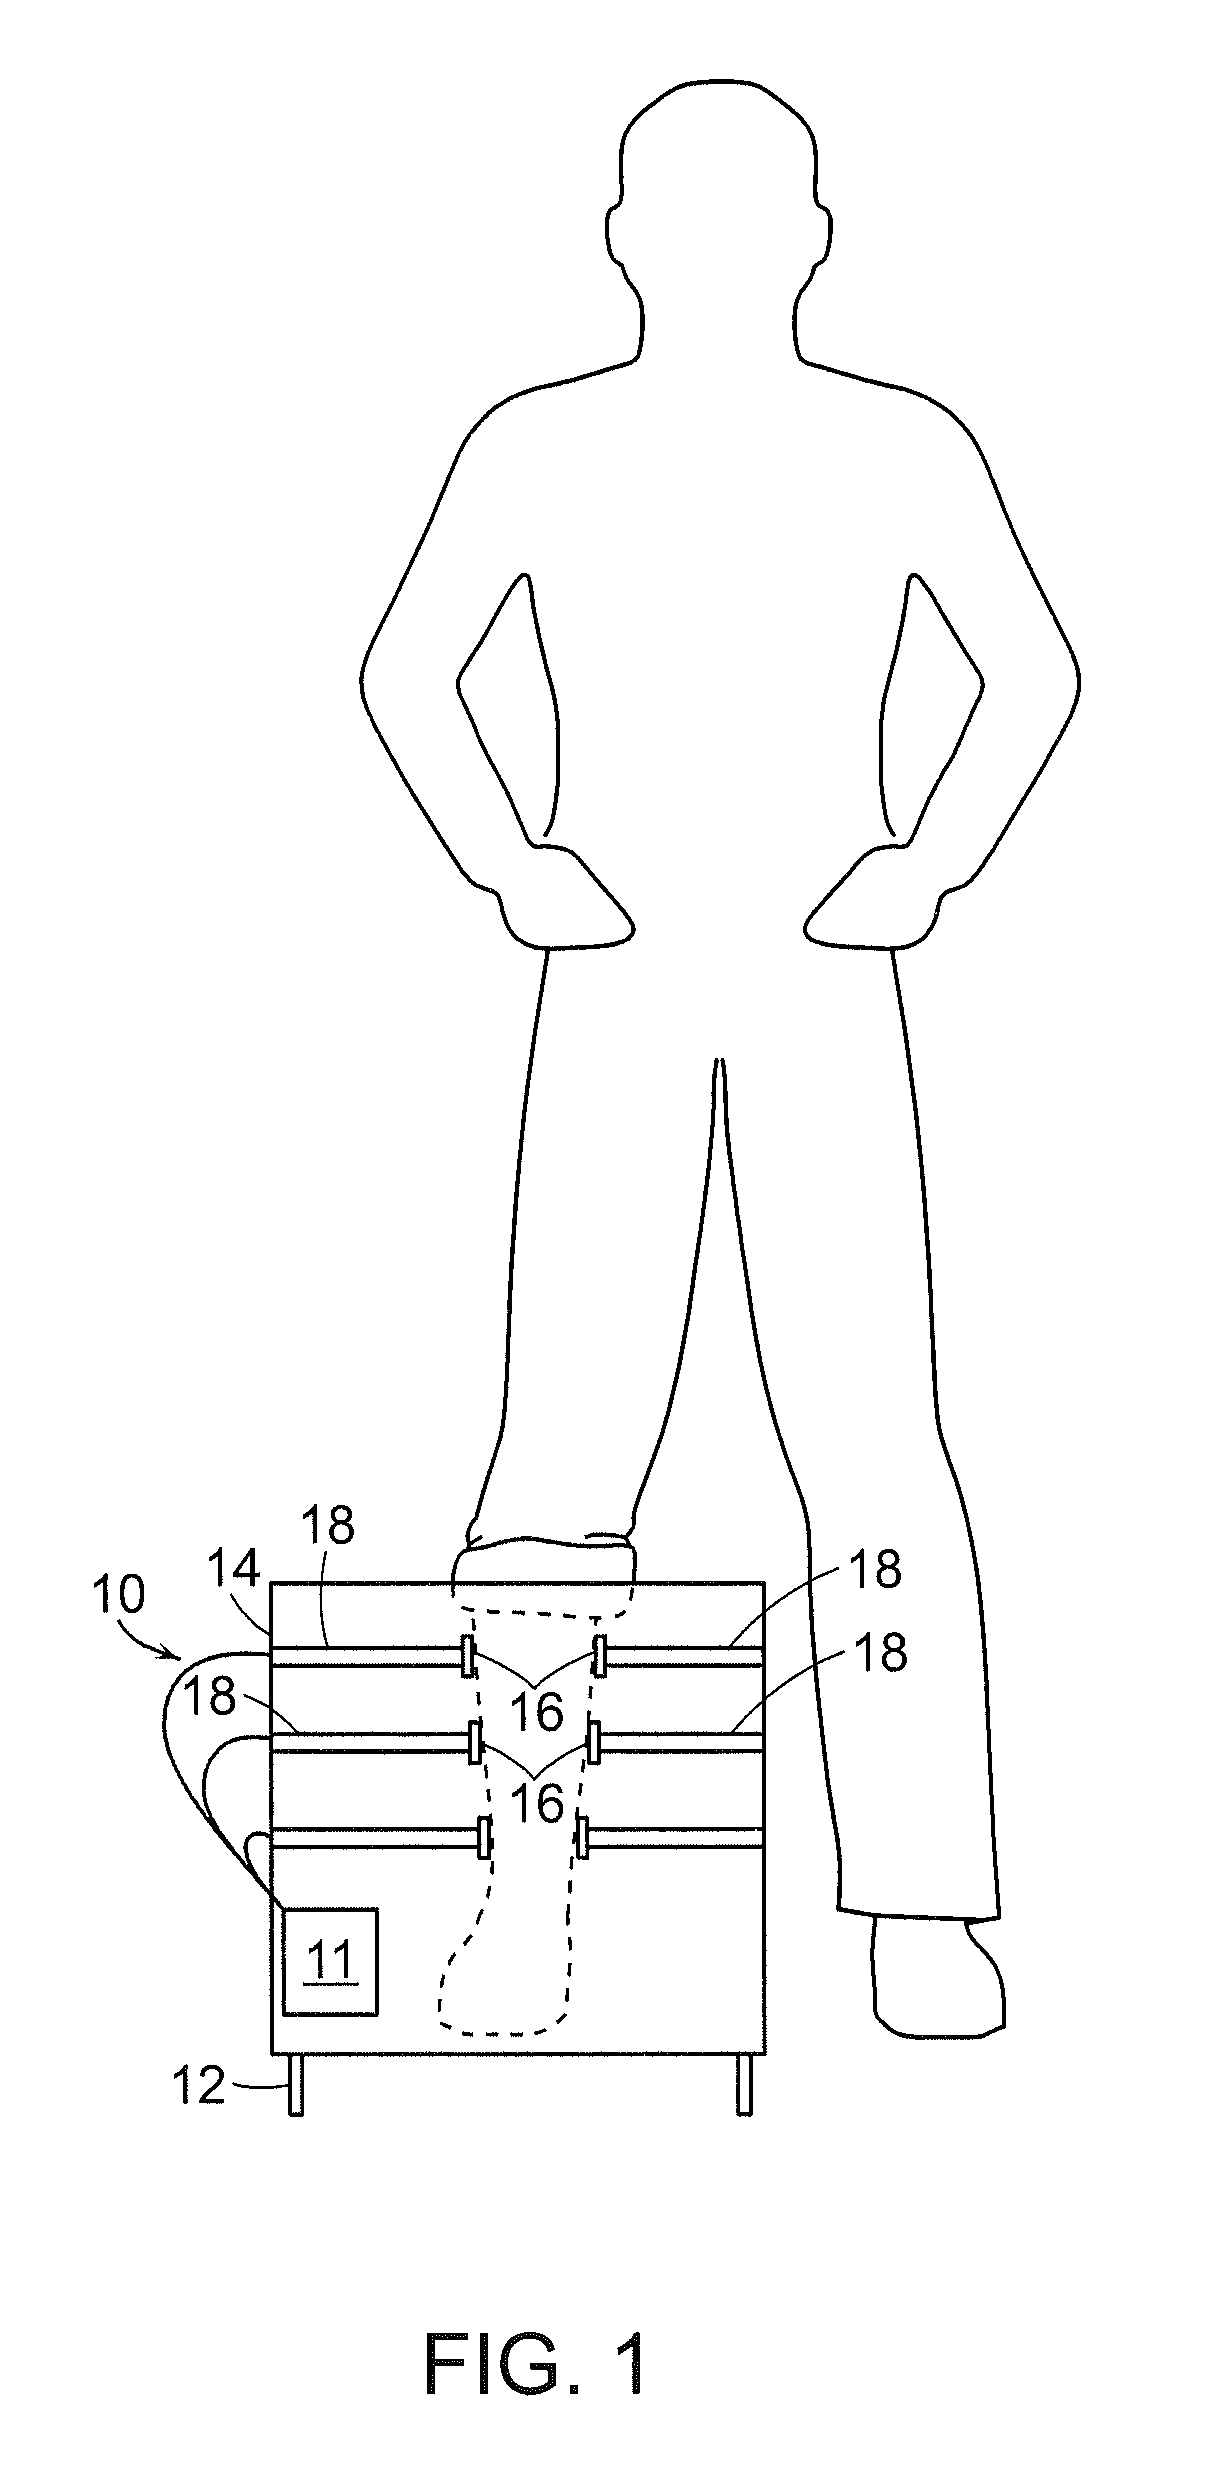 Physiological measurement device or wearable device interface simulator and method of use